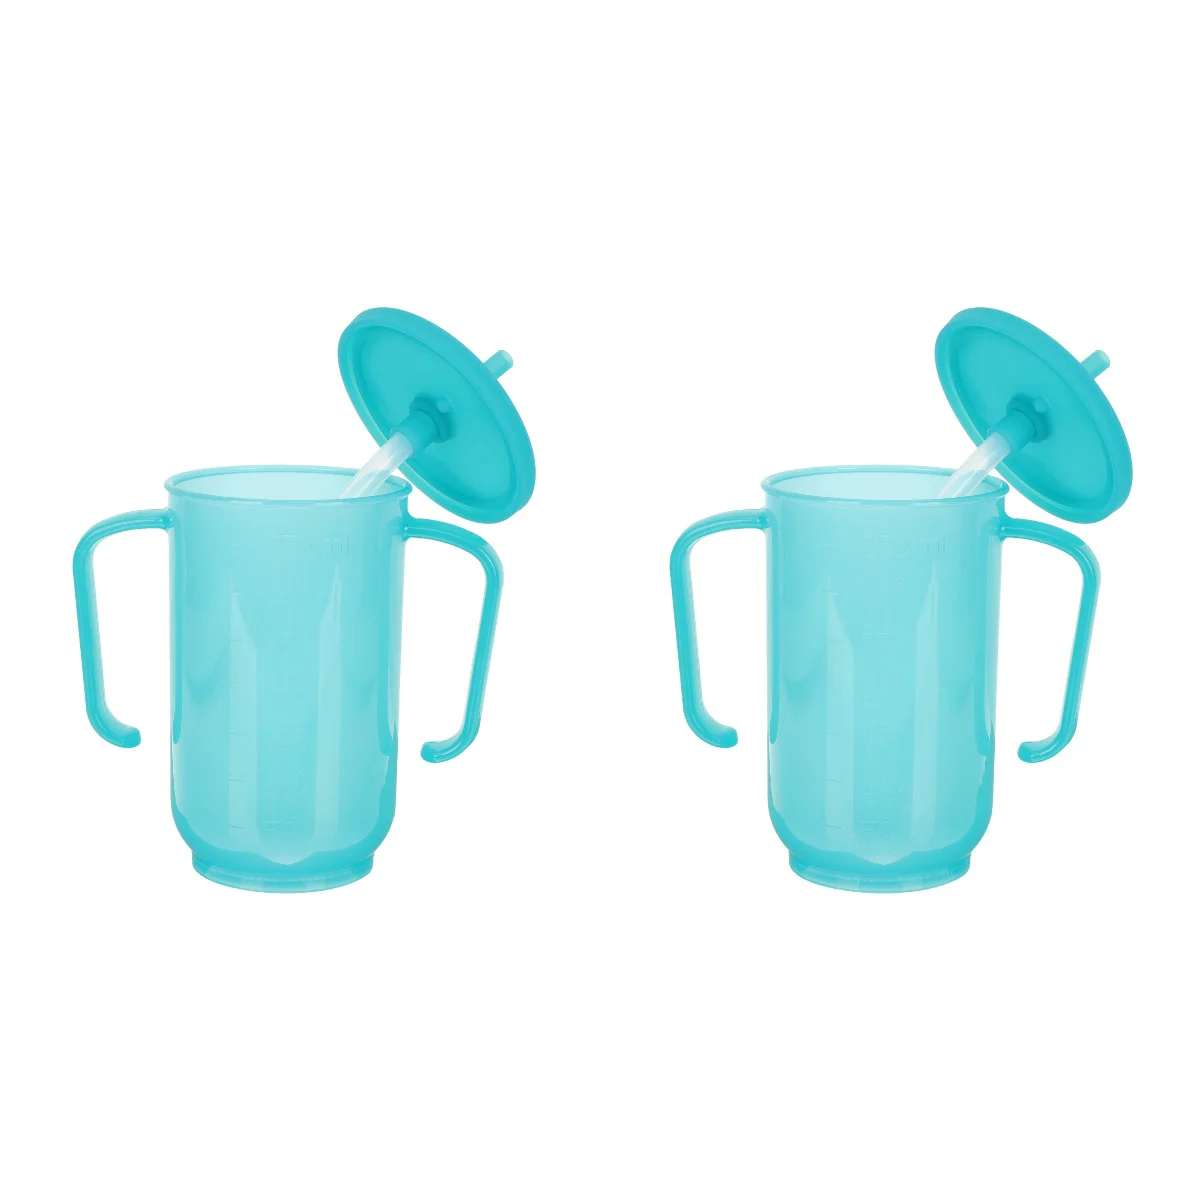 

Adults Two Handles Plastic Cups Lids Straws Transparent Blue Adult Sippy Cup Unspillable Cup Bedridden Patient Products